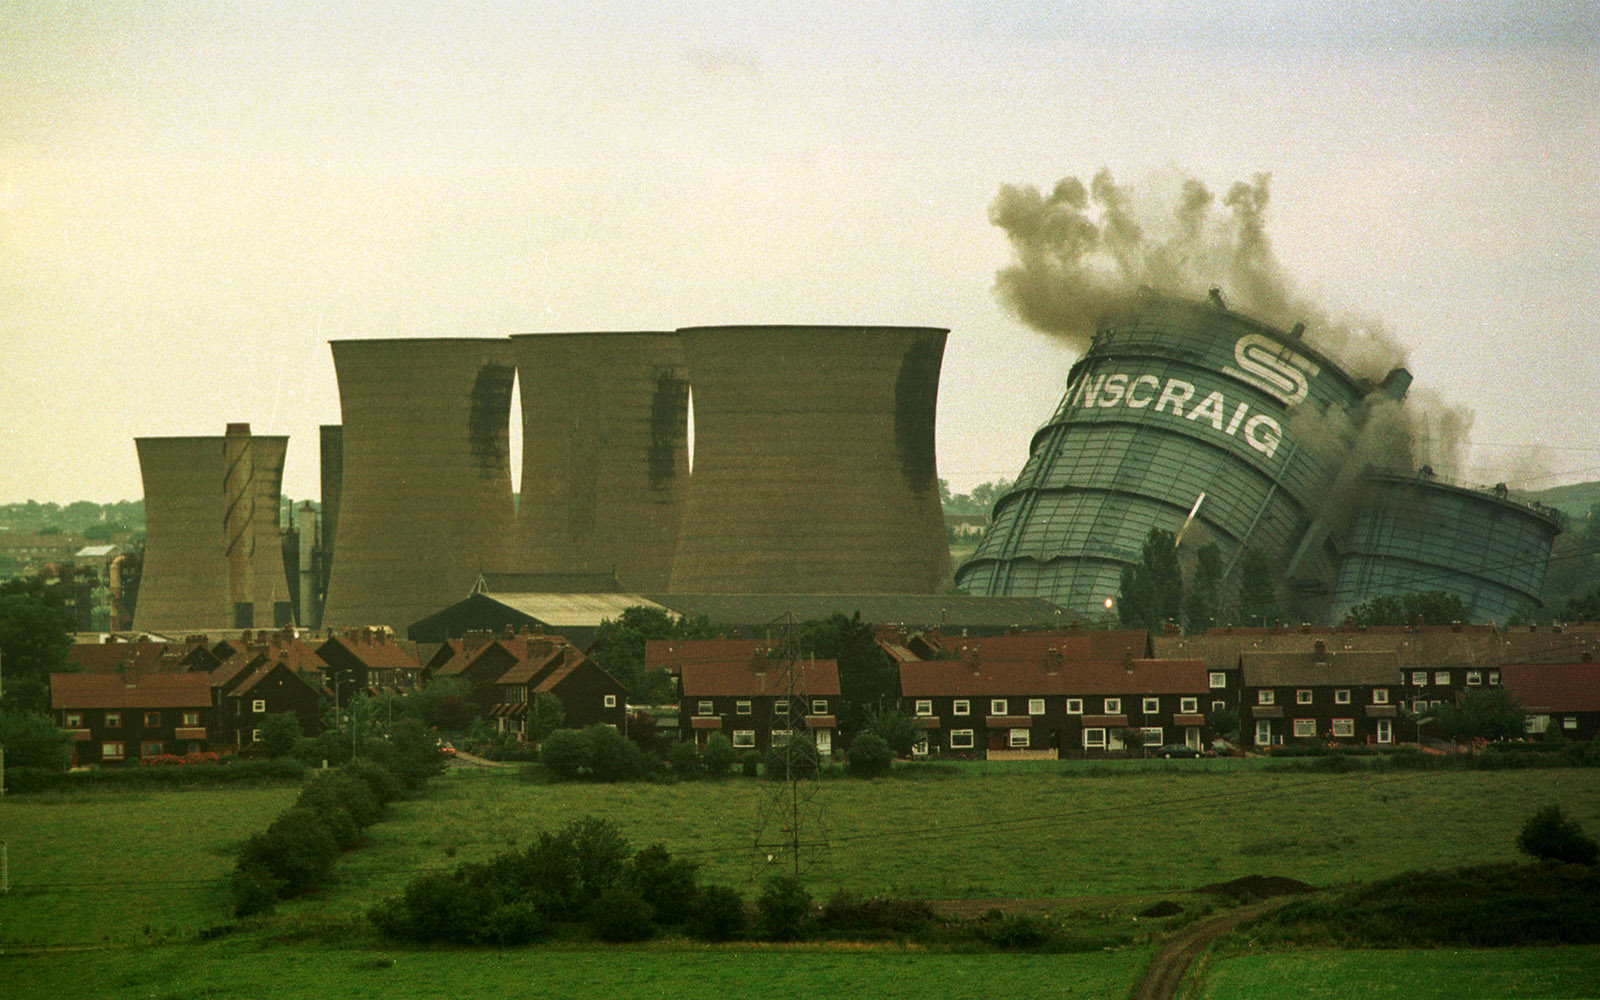 The former British Steel works at Ravenscraig in Motherwell being demolished by controlled explosion, Lanarkshire, Scotland, 1996